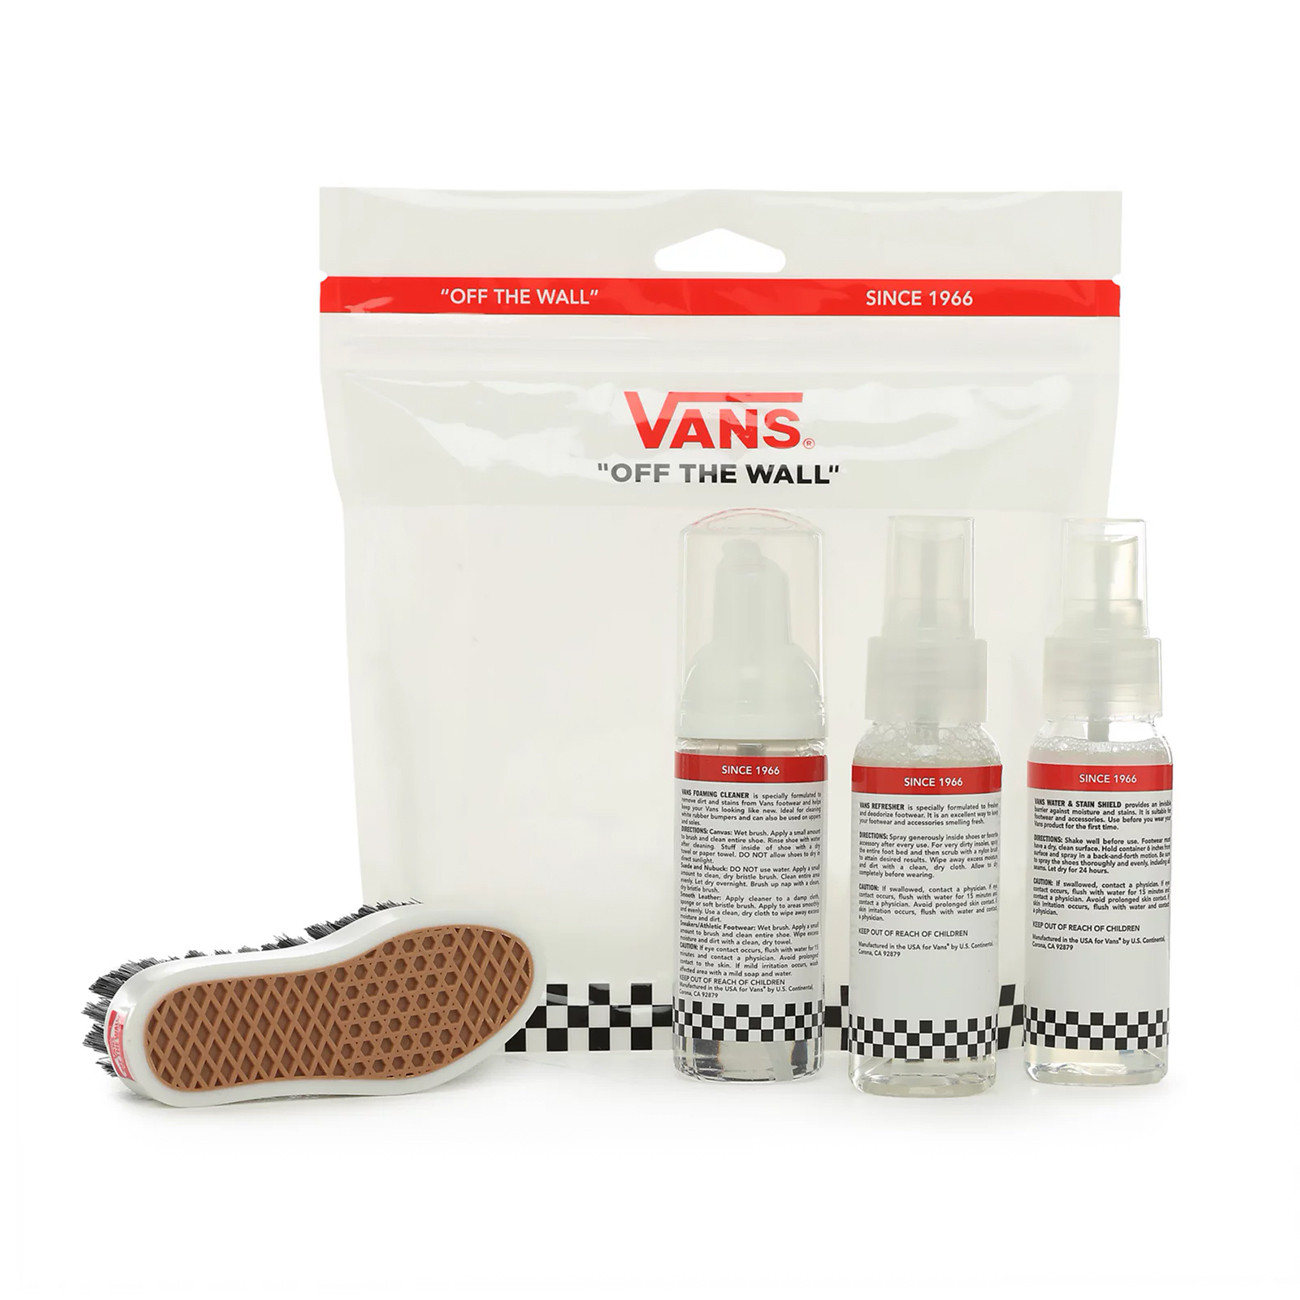 Product of the week: Vans Shoe Care Kit 